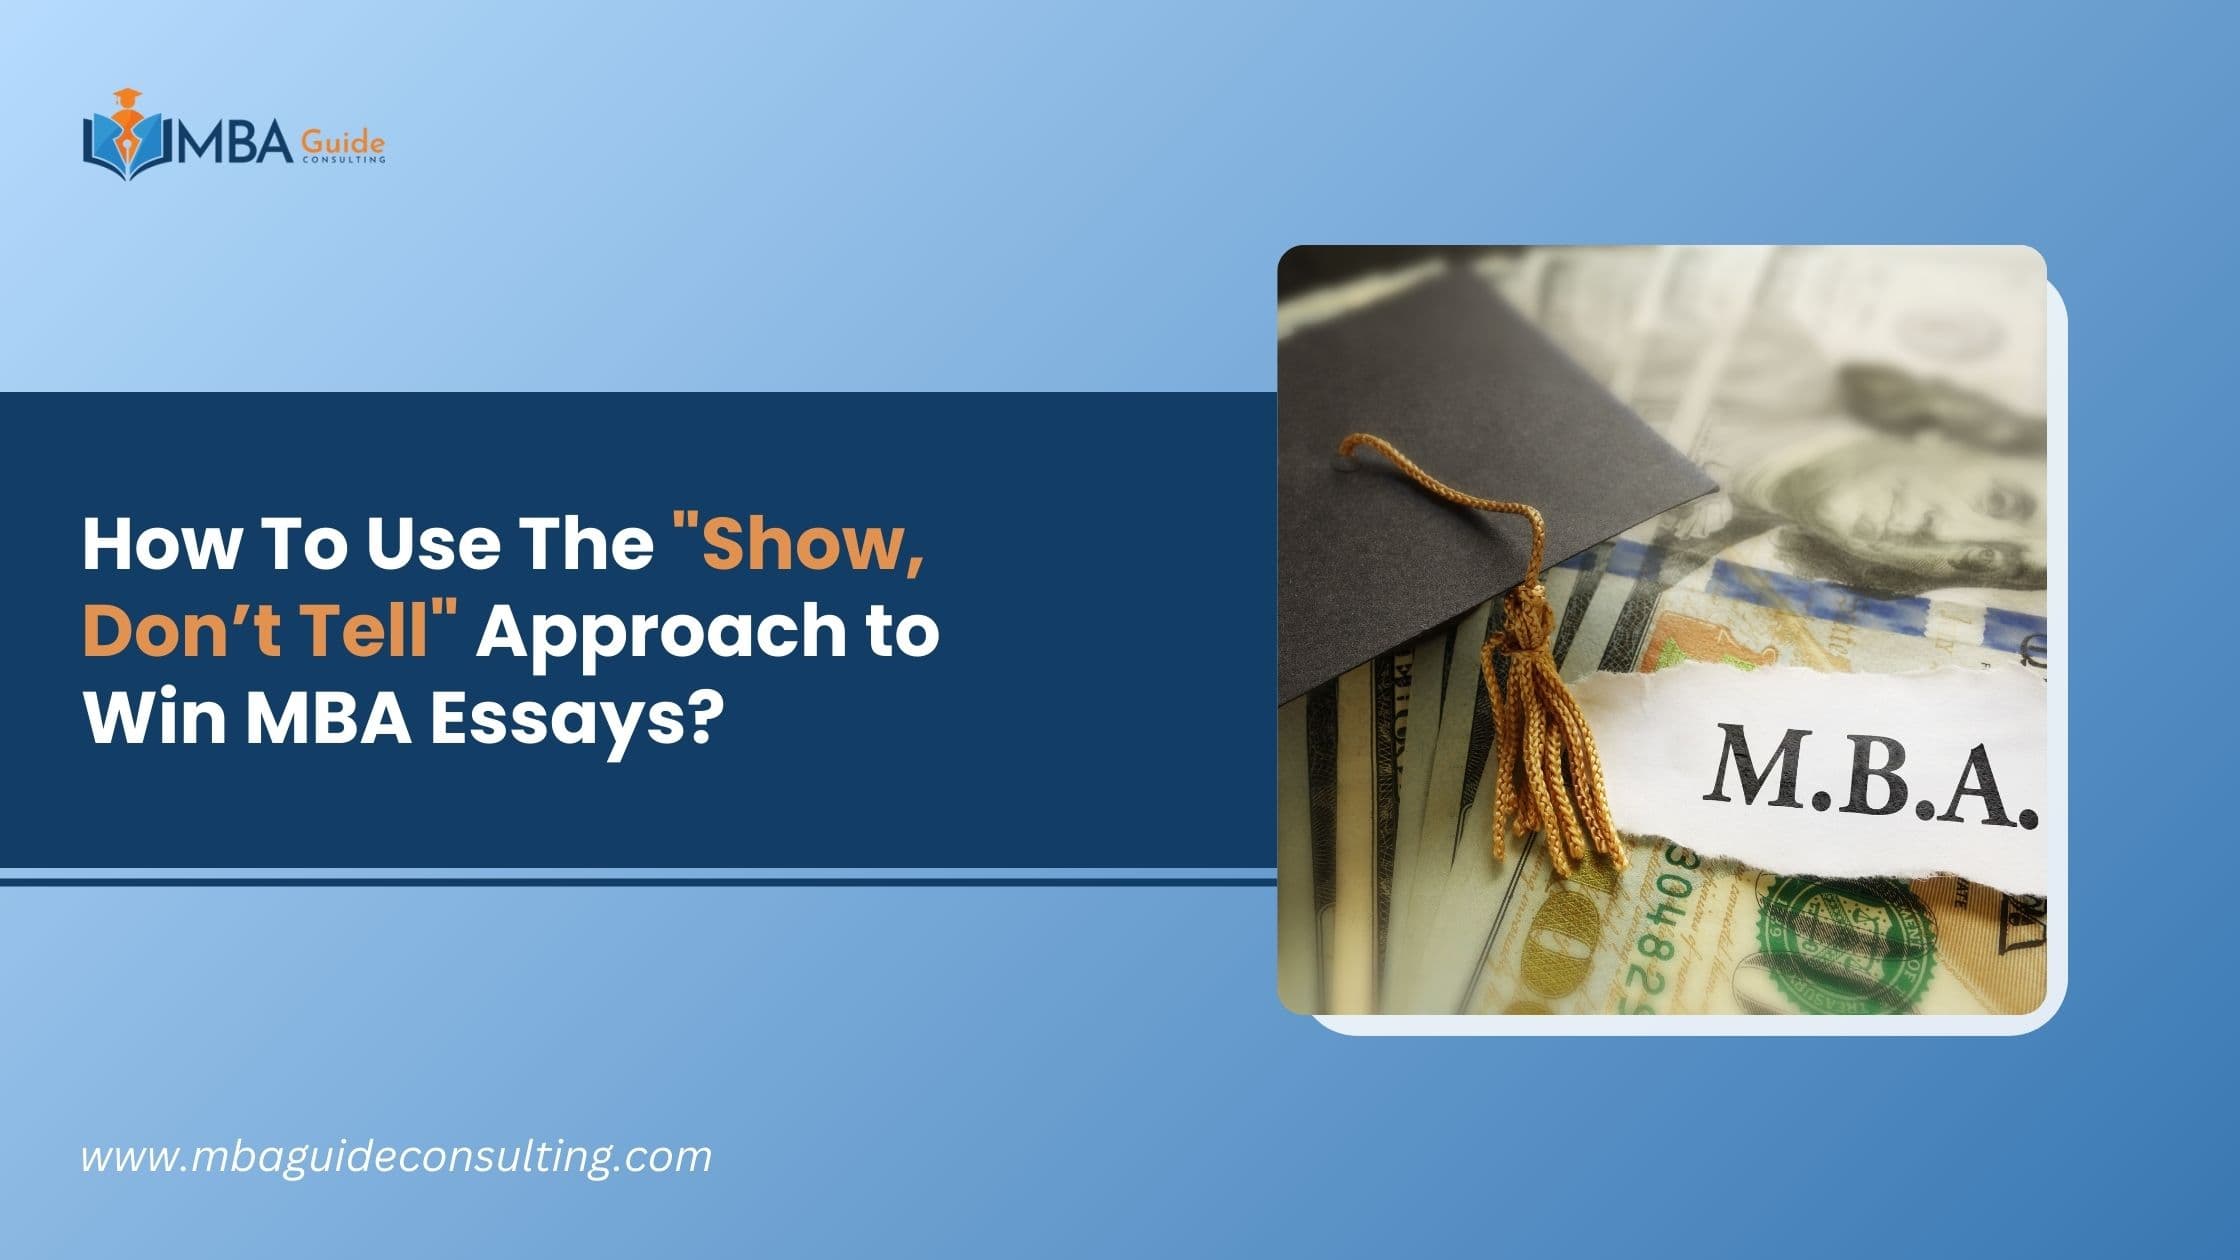 Show, Don’t Tell Approach to Win MBA Essays